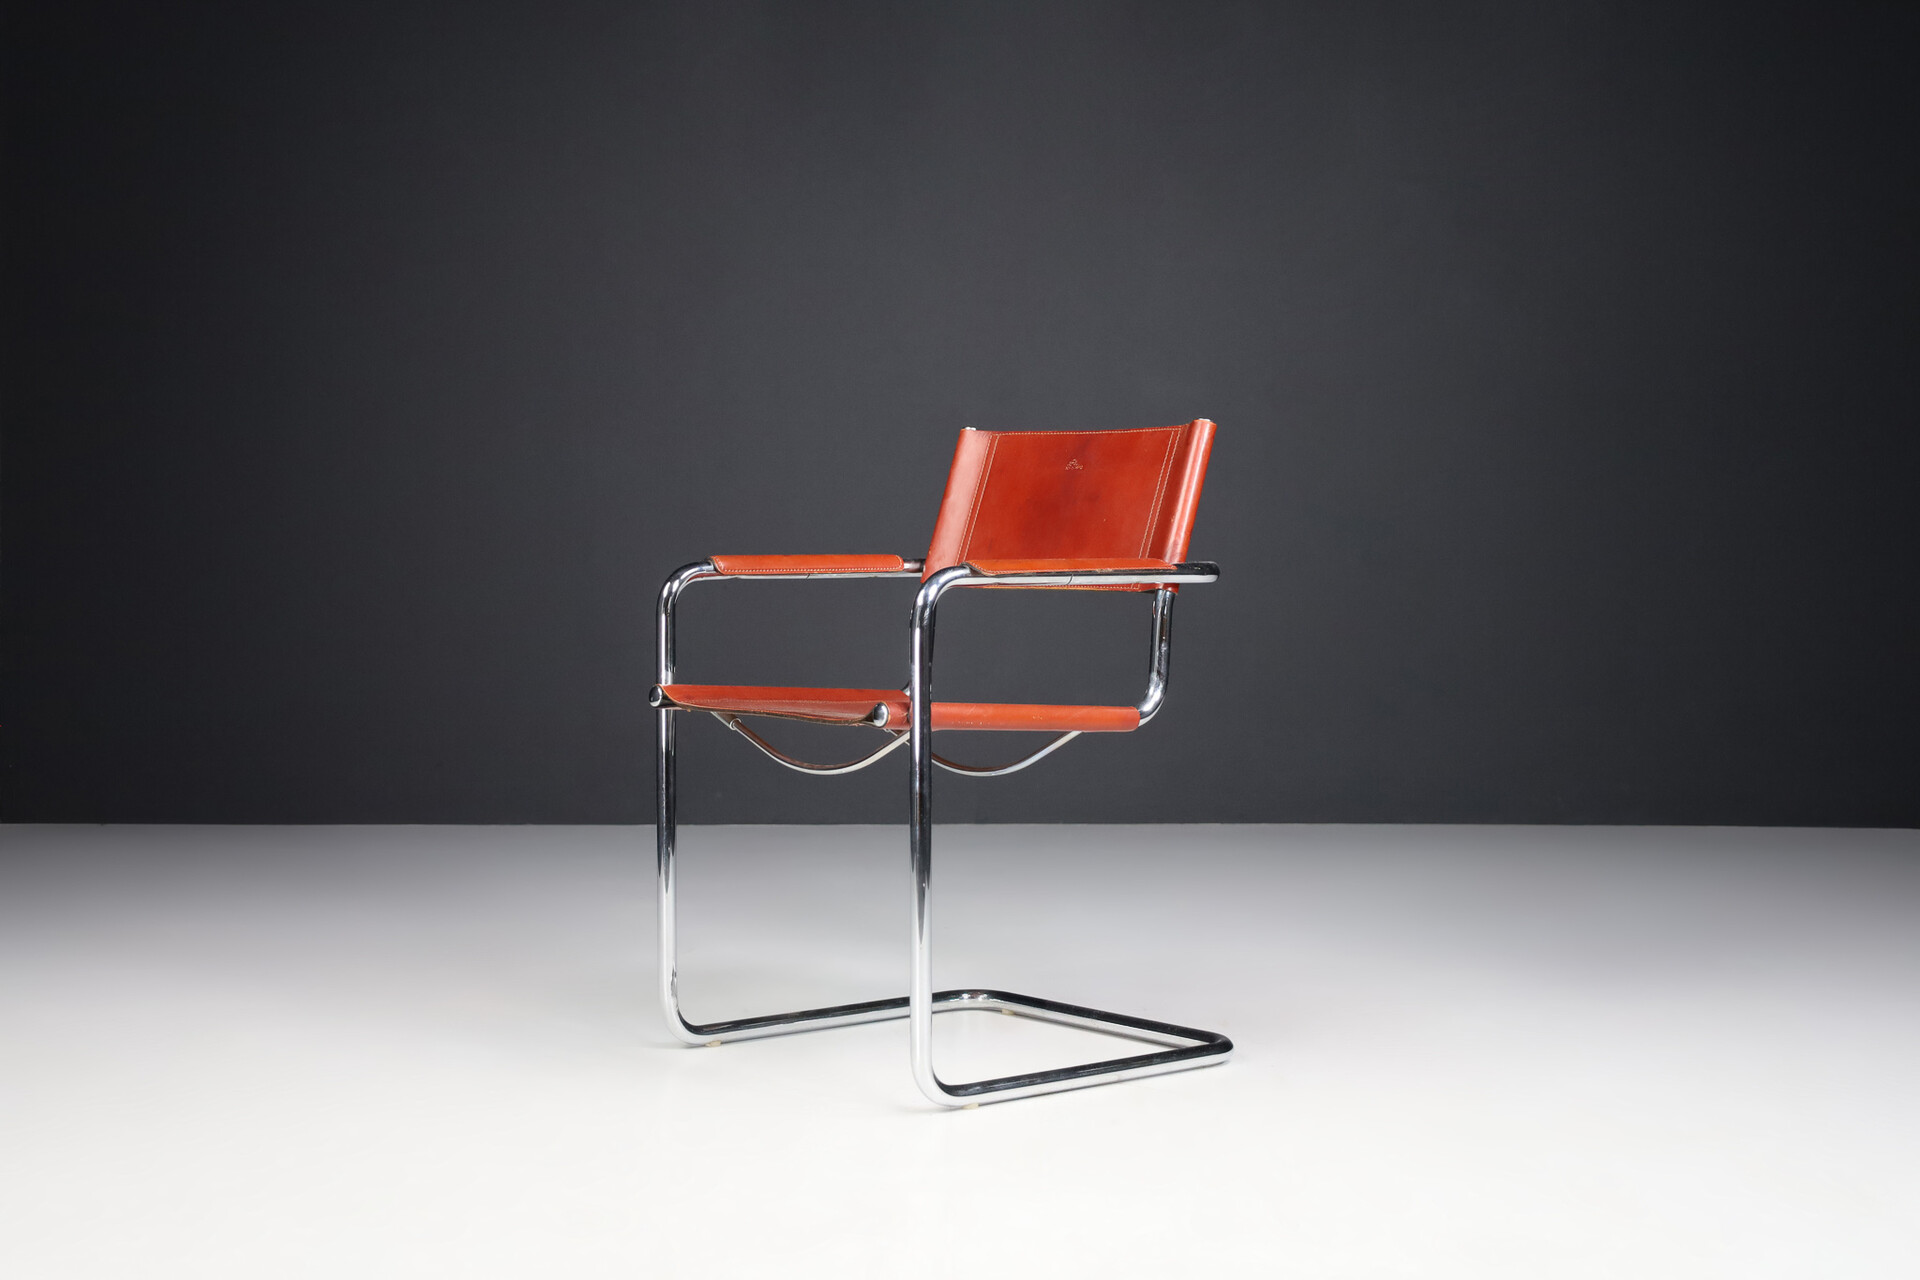 Mid century modern Leather MG5 Cantilever Bauhaus Chair by Matteo Grassi, Italy 1960s Mid-20th century